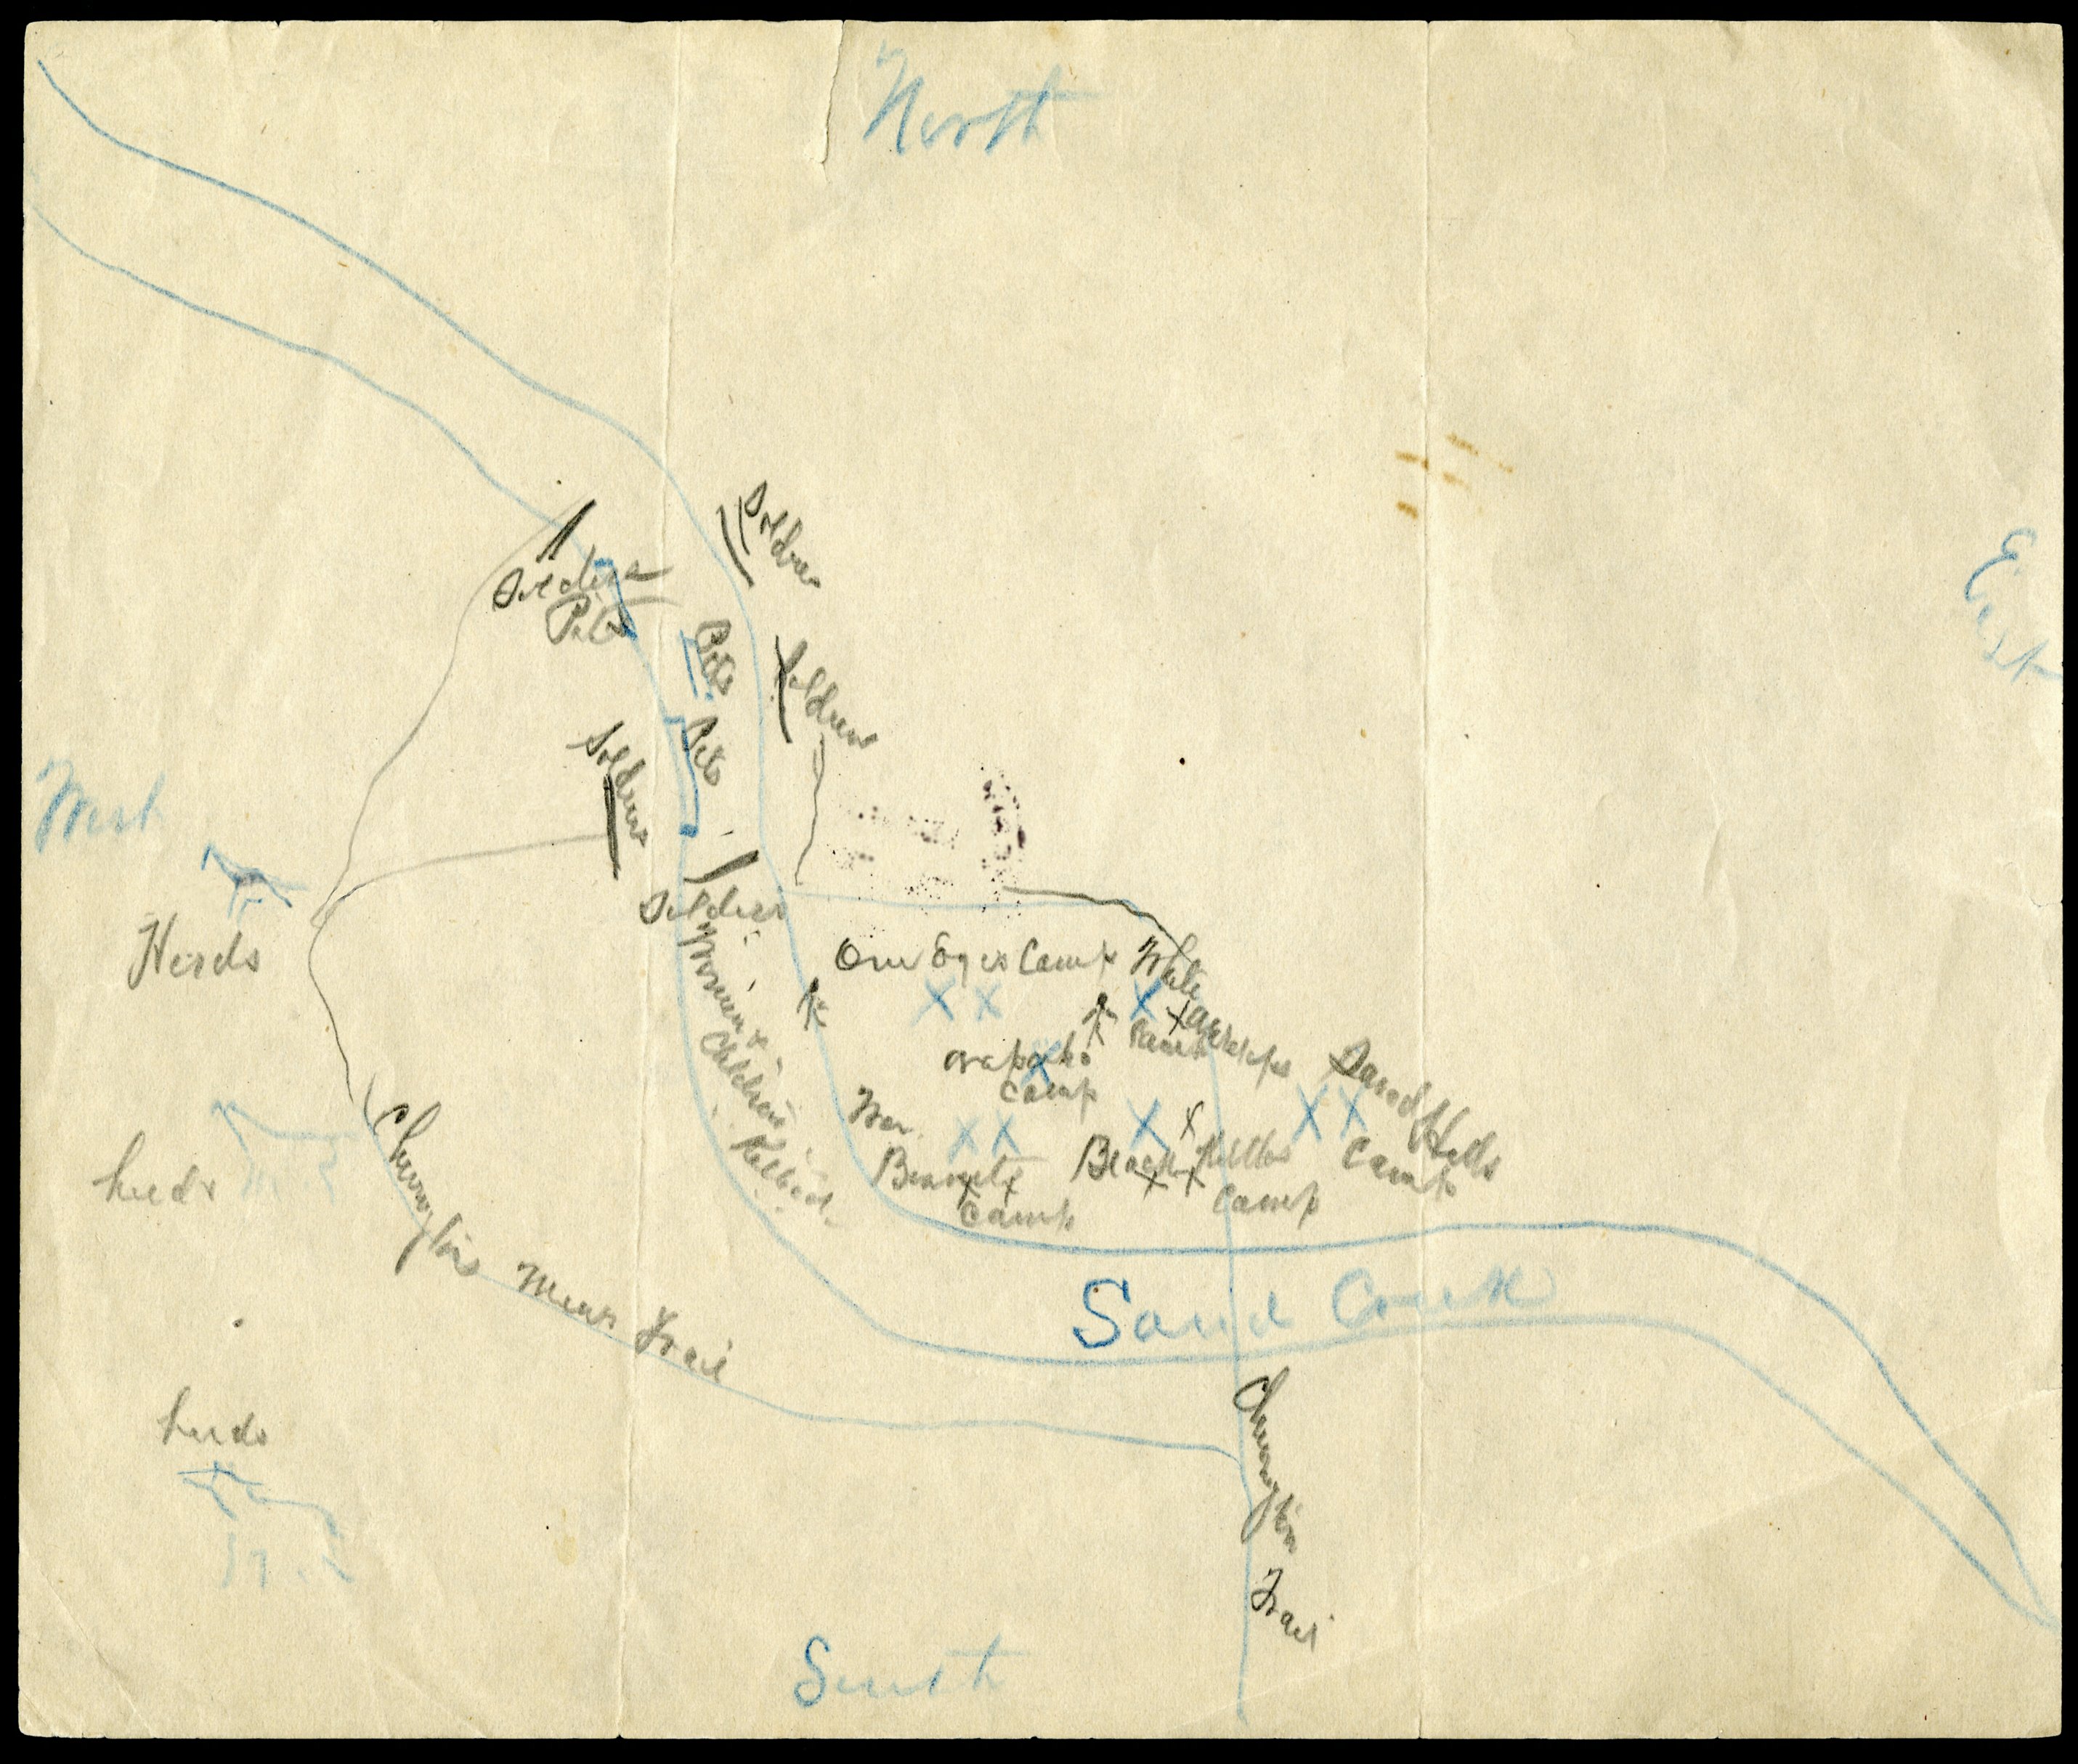 Image of a hand-drawn map on white paper. The map indicates North at the top of the page and South at the bottom; in thin cursive handwriting, the Sand Creek snakes its way from the left of the map, down to the south. There are "X" marks alongside the creek, with names that suggest who was positioned in the area. "Chivington Trail" is legible along a path leading from the south up north to the area where others were situated along the creek.